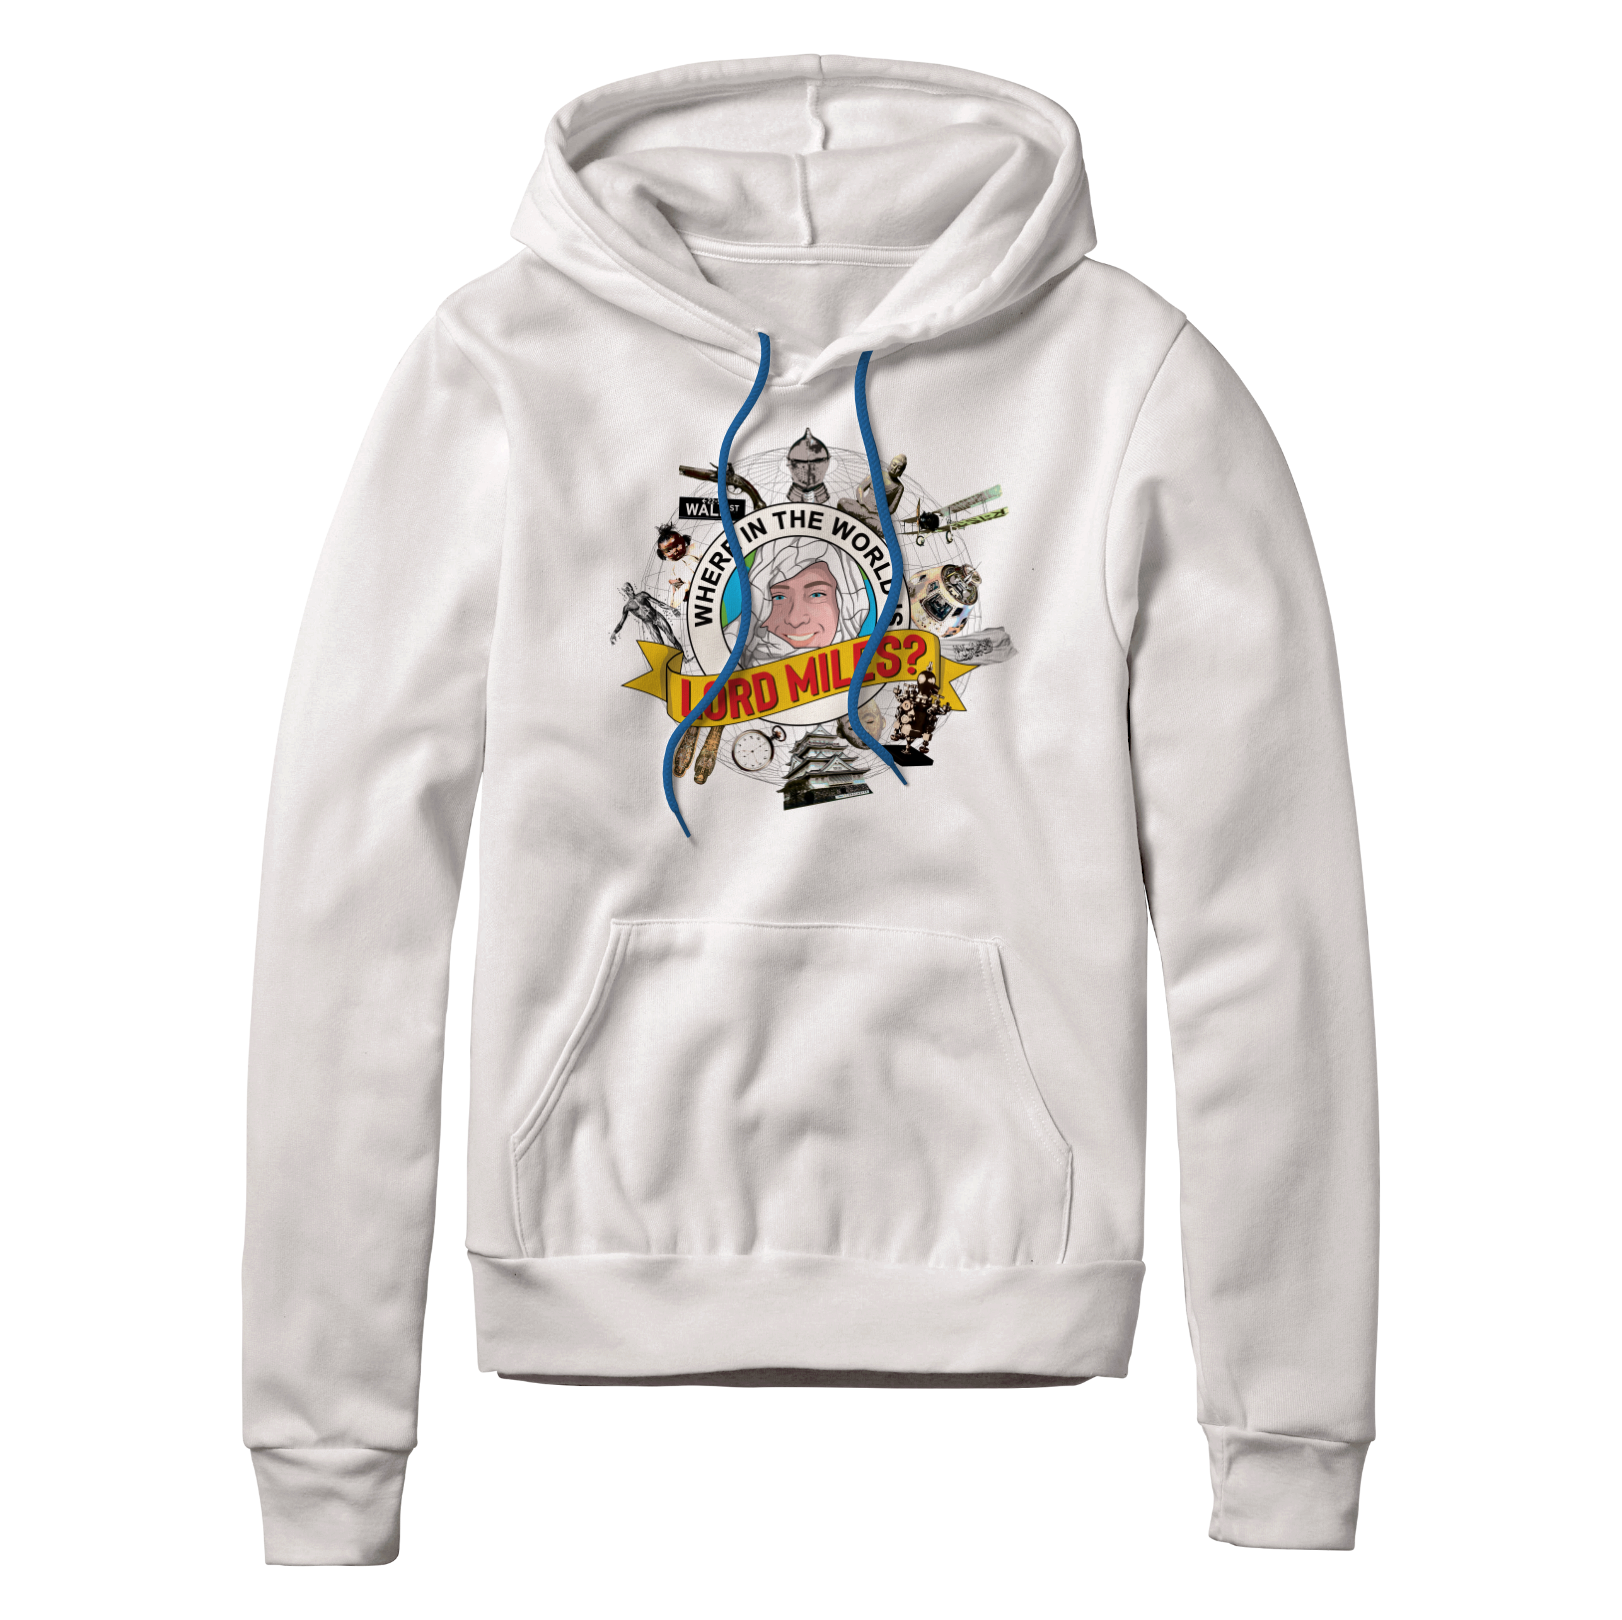 Where in the World is Lord Miles? Hoodie